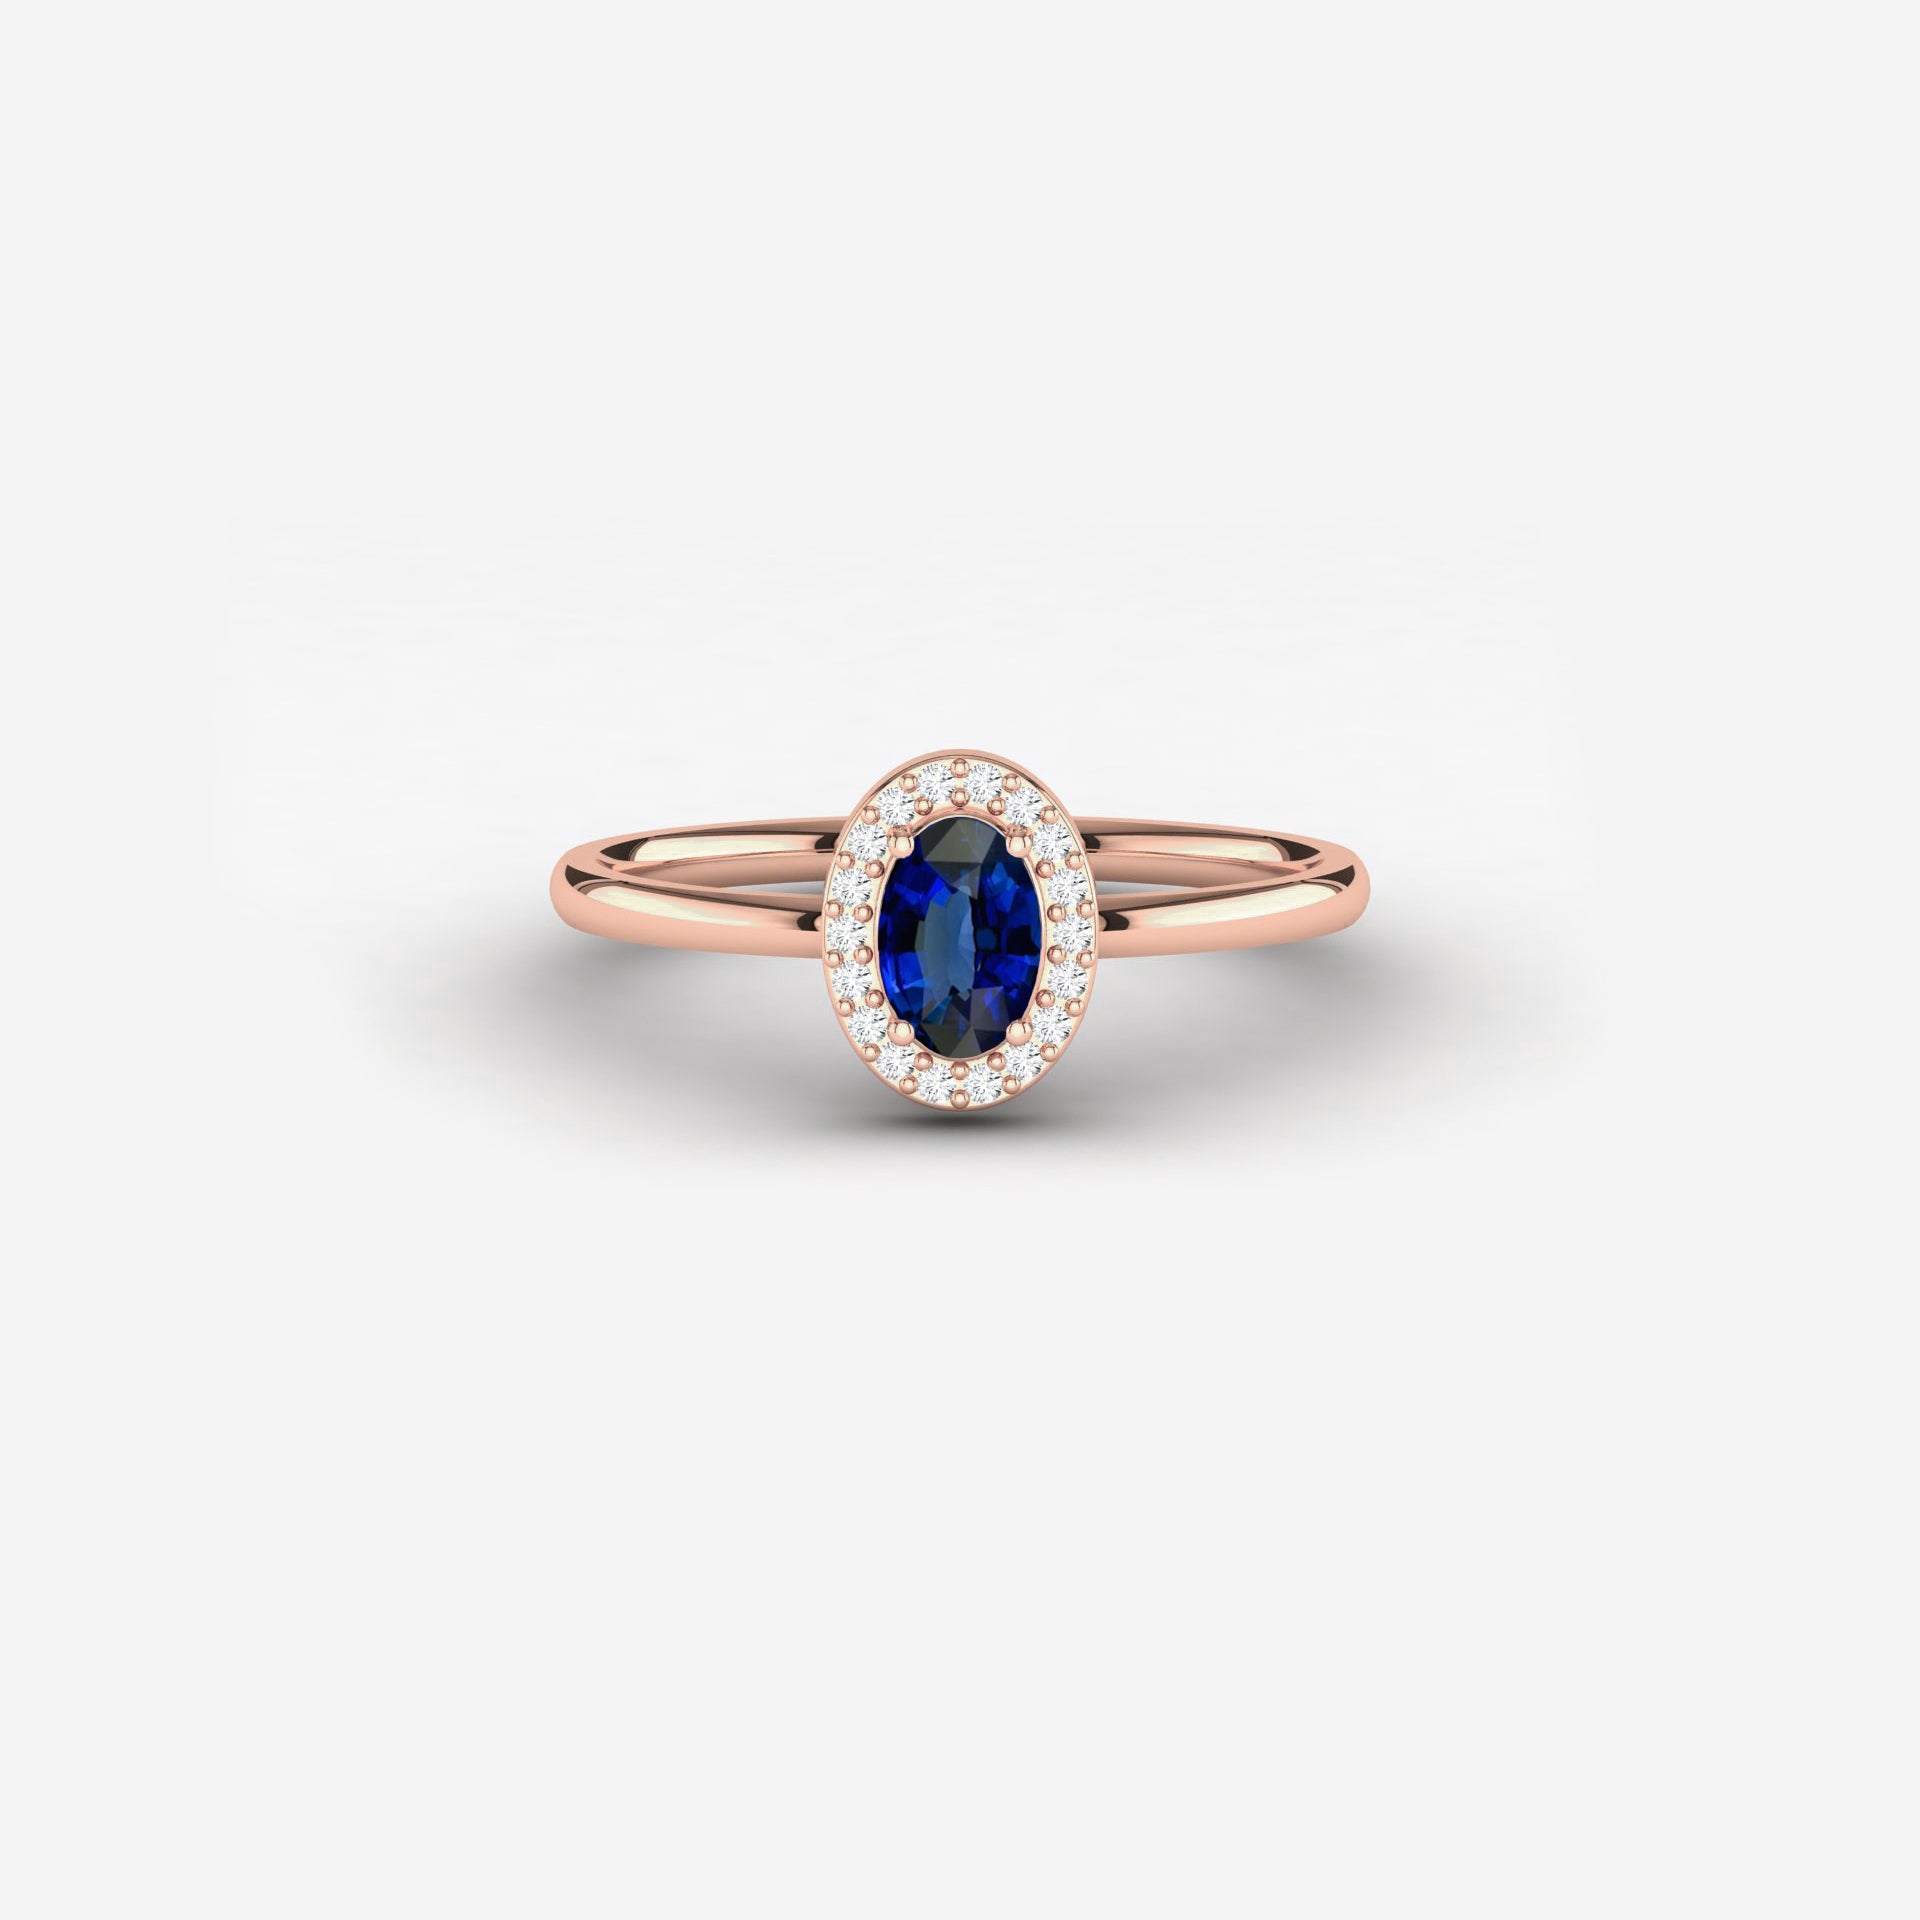 Floating Oval Sapphire Halo Engagement Ring